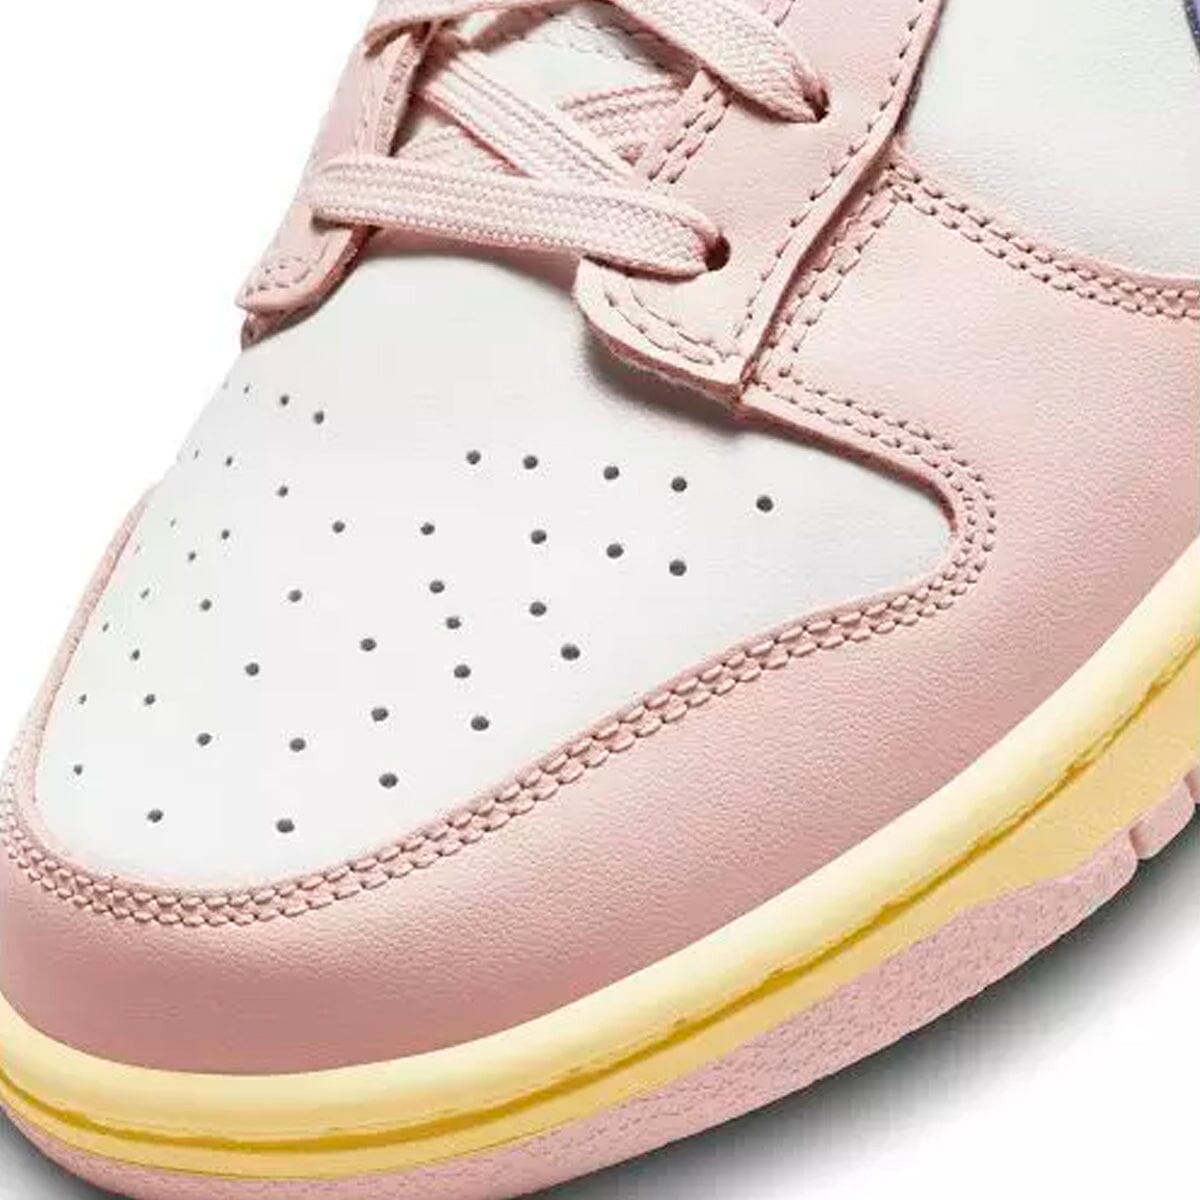 Nike Dunk Low Pink Oxford Nike Dunk Low Blizz Sneakers 